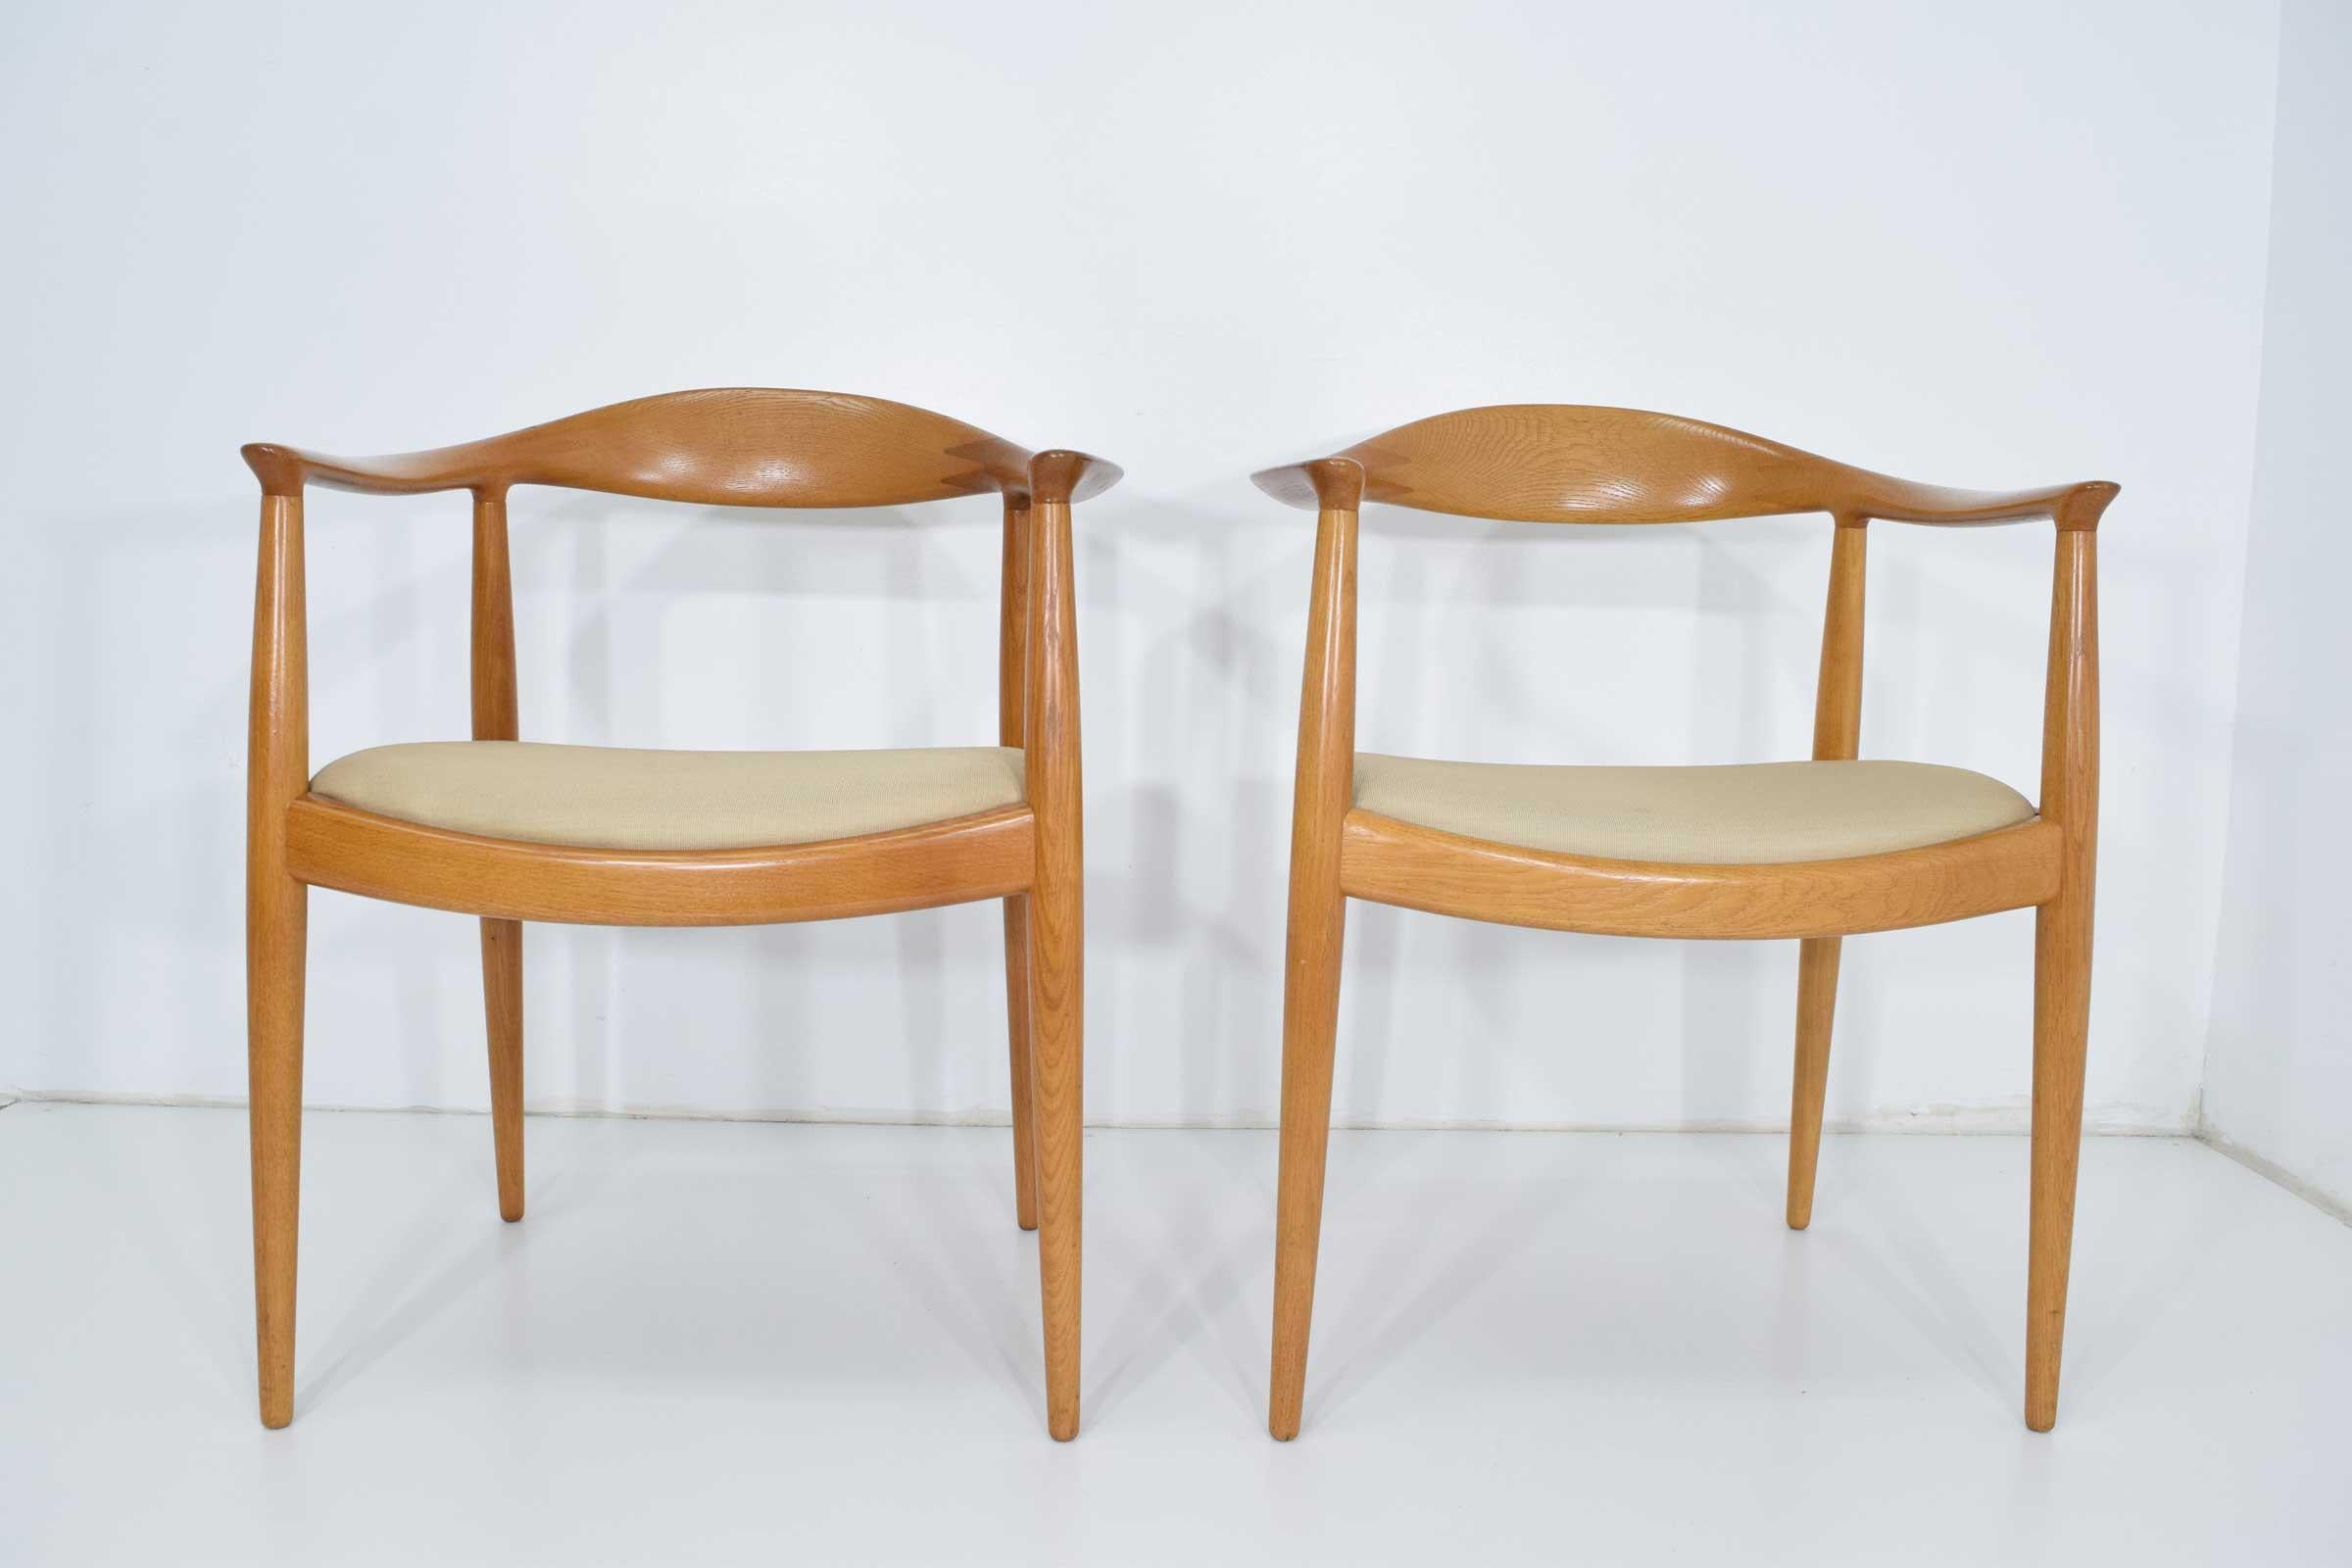 The most recognized of Hans Wegner’s chairs, the round back or “The Chair” was designed in 1948. Exquisitely constructed by cabinetmaker Johannes Hansen. This chair was made famous in the US when the chair was used during the Nixon/ Kennedy debate,